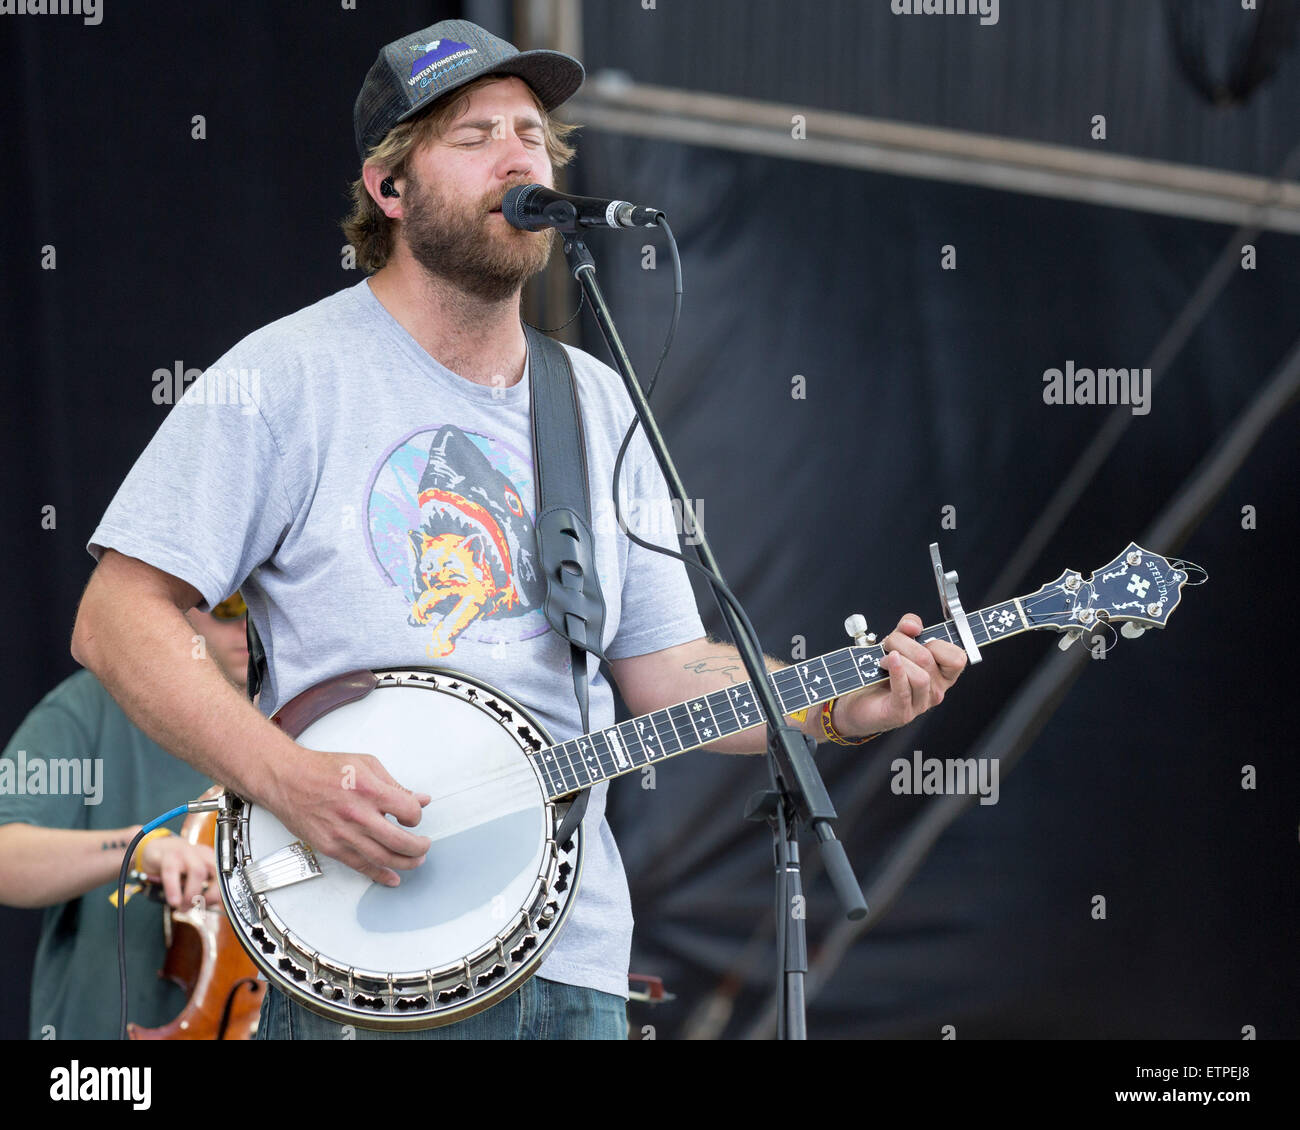 June 13, 2015 - Manchester, Tennessee, U.S - Musician DAVE CARROLL of Trampled by Turtles performs live on stage at the Bonnaroo Arts and Music Festival Manchester, Tennessee (Credit Image: © Daniel DeSlover/ZUMA Wire) Stock Photo